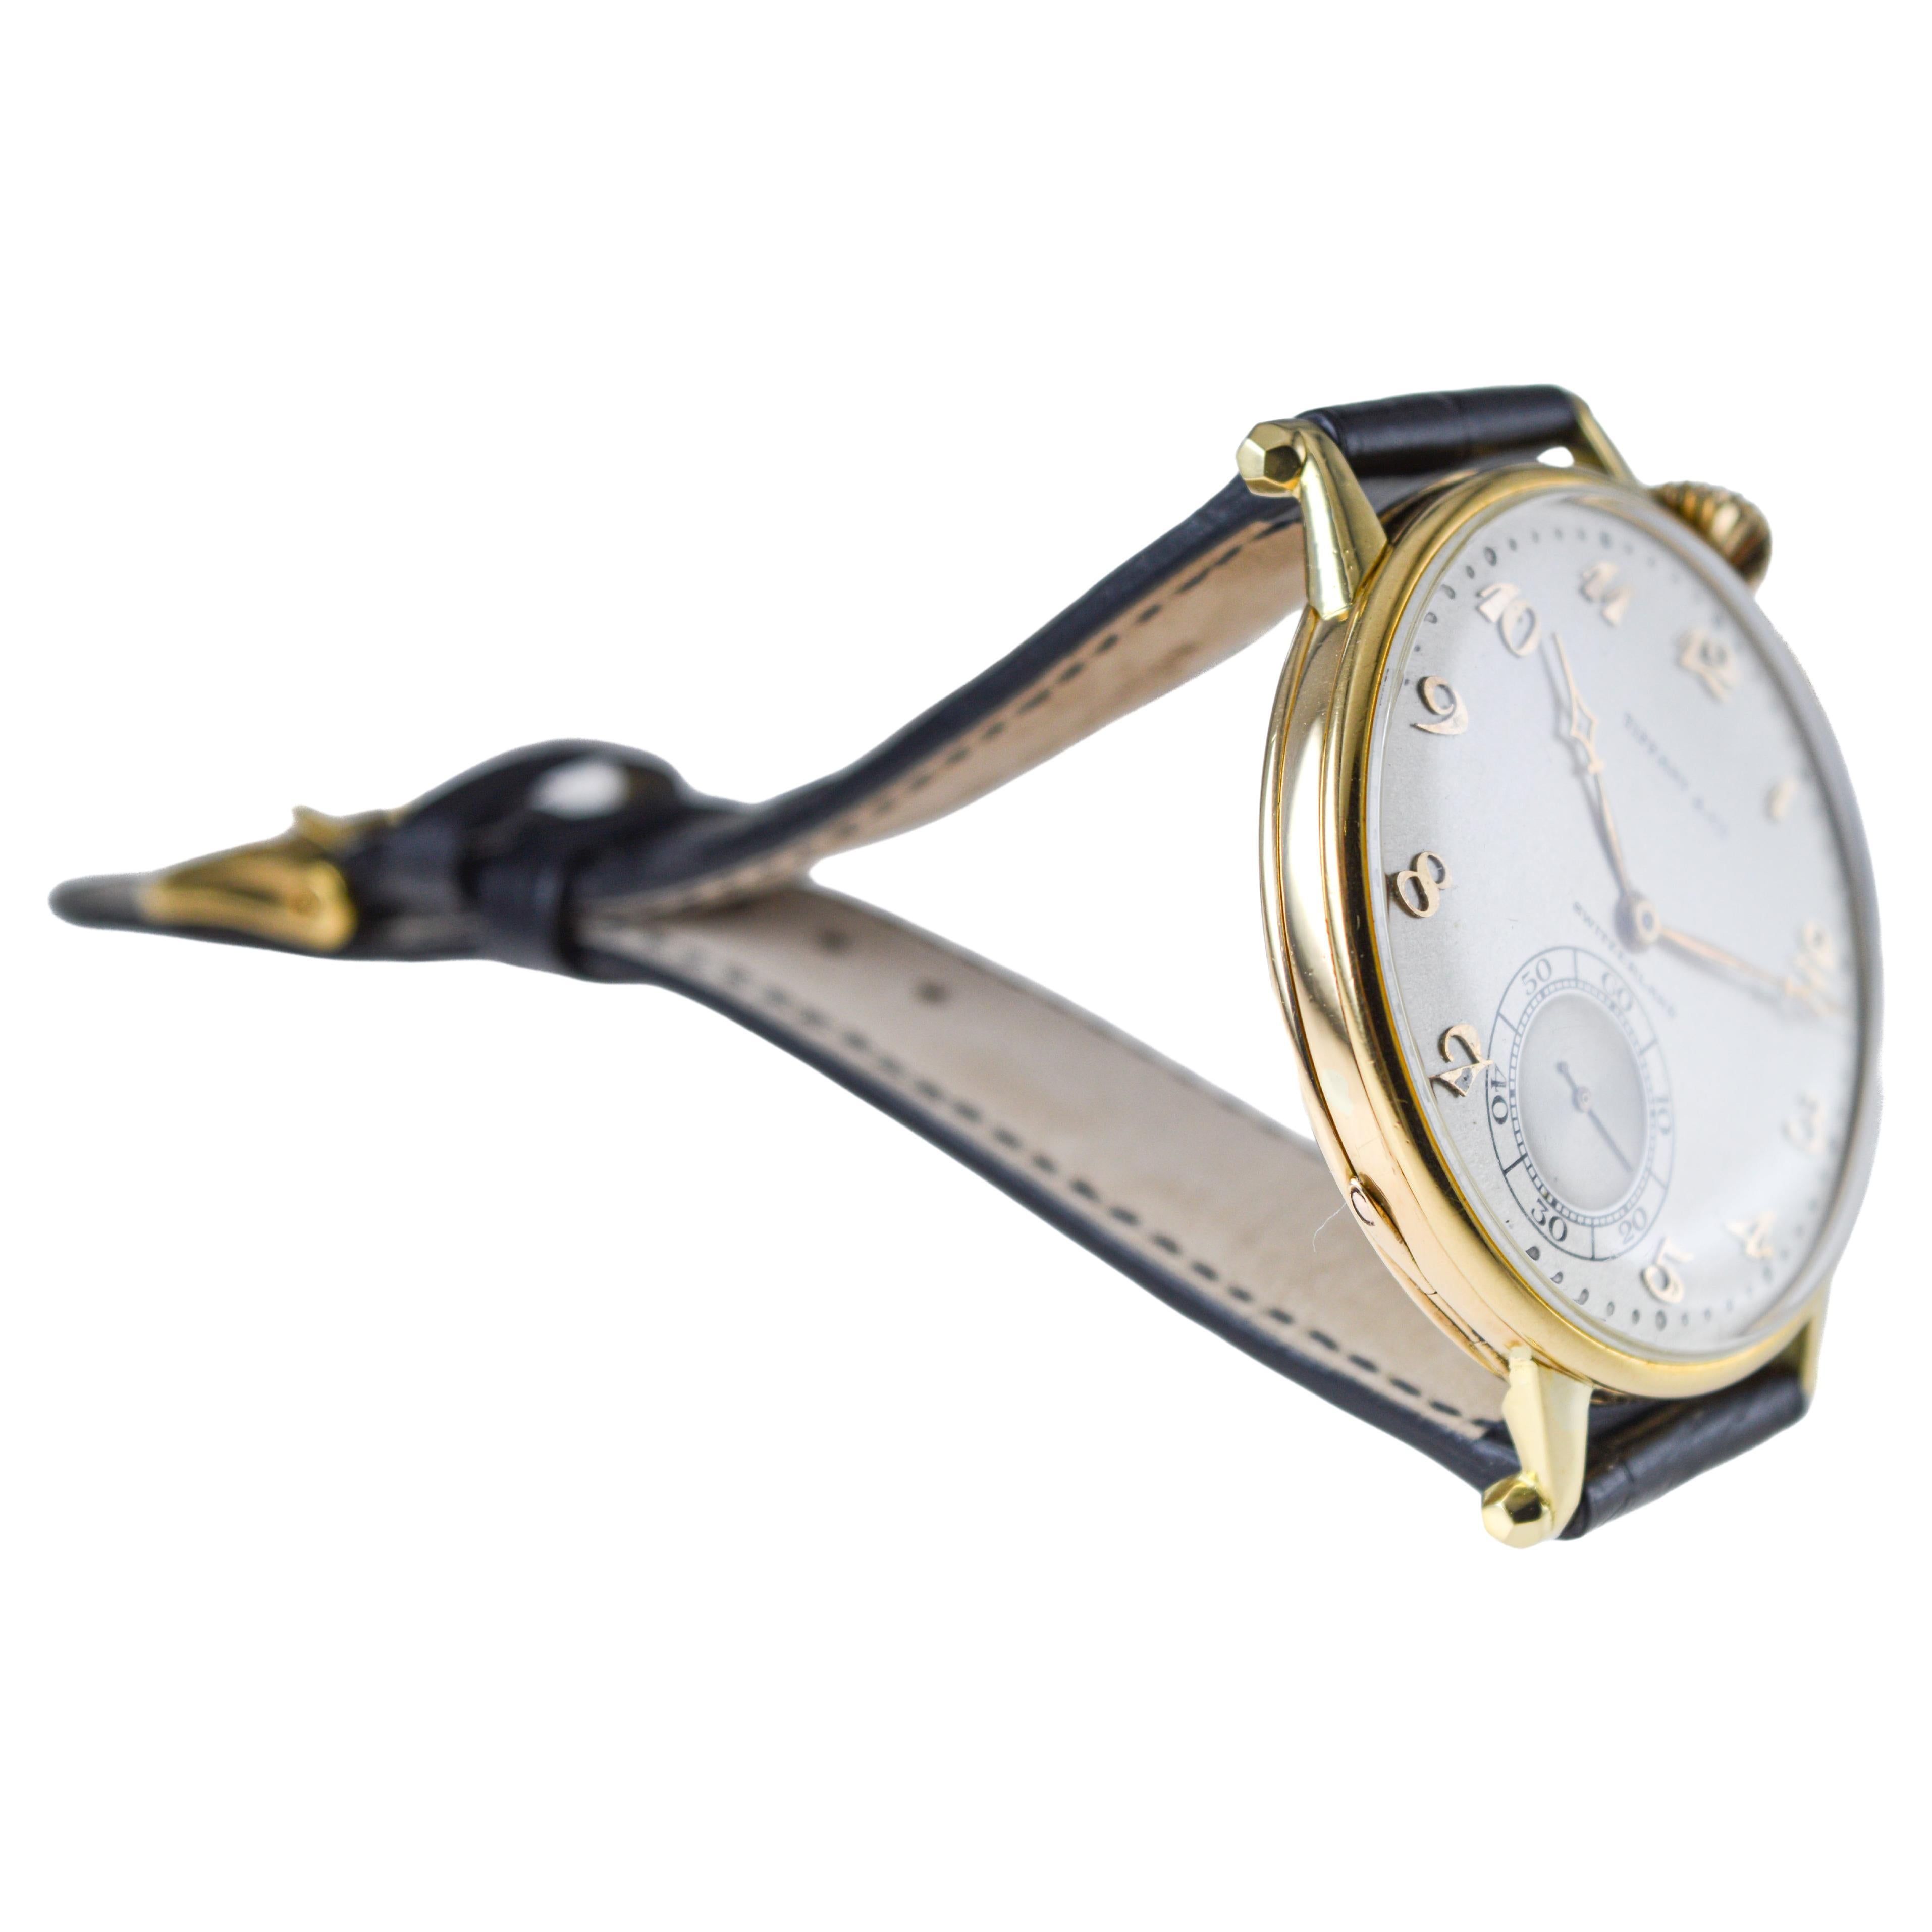 Agassiz 18Kt. Gold Oversized Watch for Tiffany & Co. Stern Freres Dial 1920's In Excellent Condition For Sale In Long Beach, CA